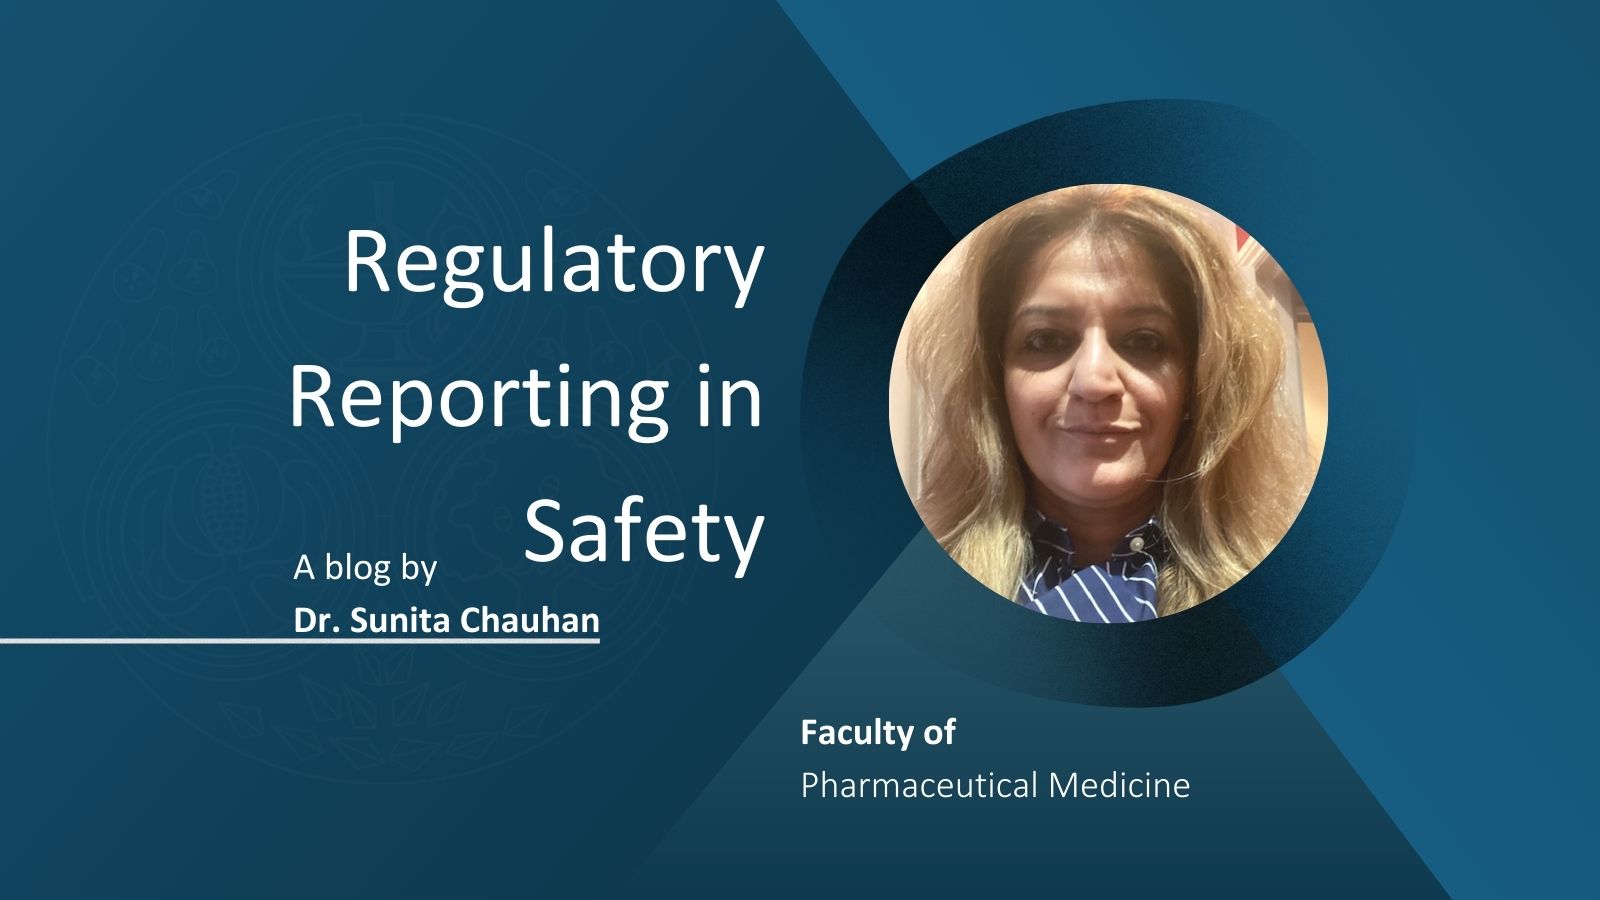 Social image for Dr Sunita Chauhan's article, with blog title Regulatory Reporting in Safety and her headshot.